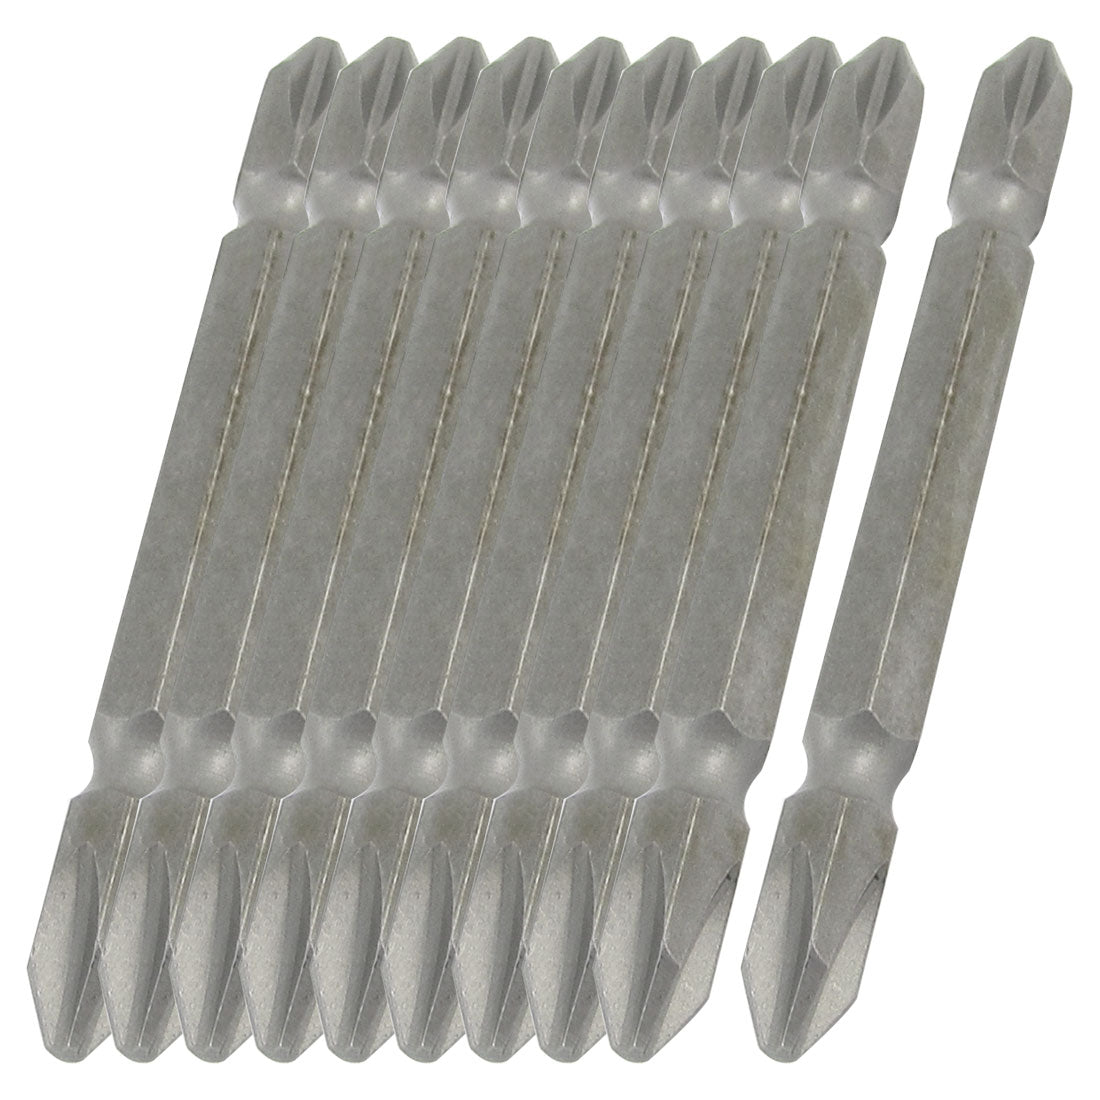 Uxcell Uxcell 10PCS 1/4" Hex Shank PH2 Double End Phillips Screwdriver Bits 50mm Length